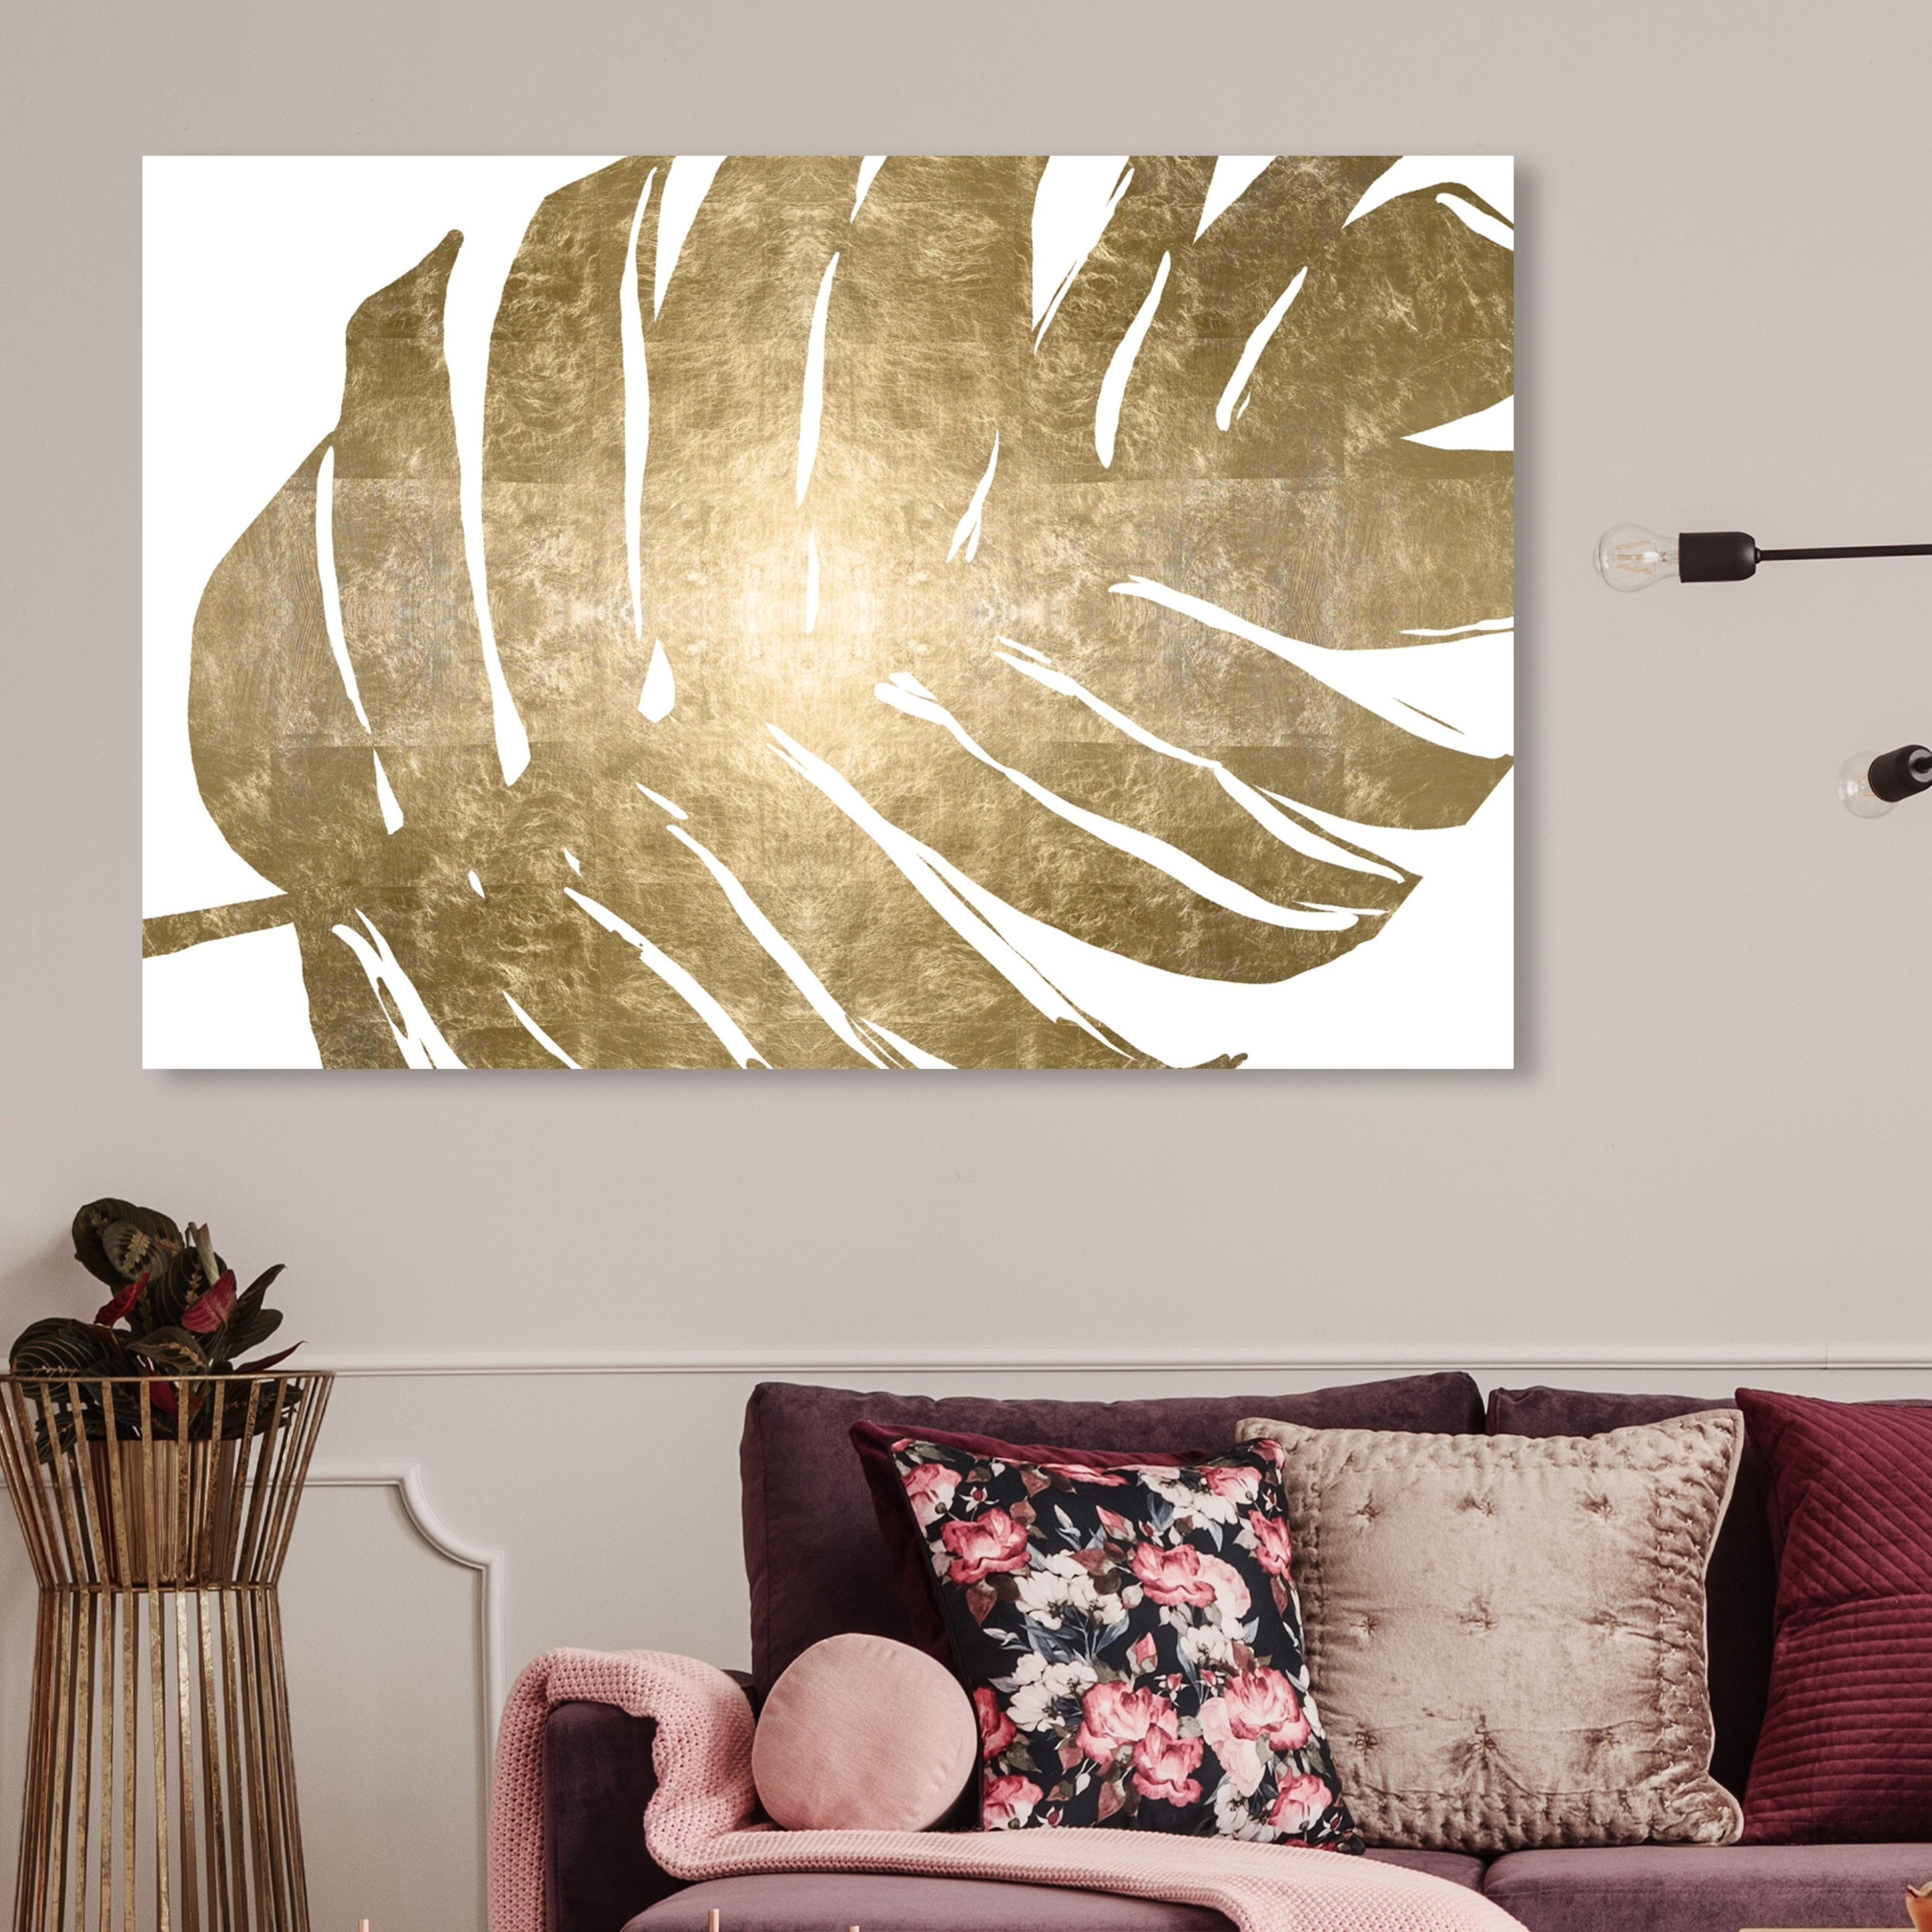 19+ Top Gold canvas wall art images information